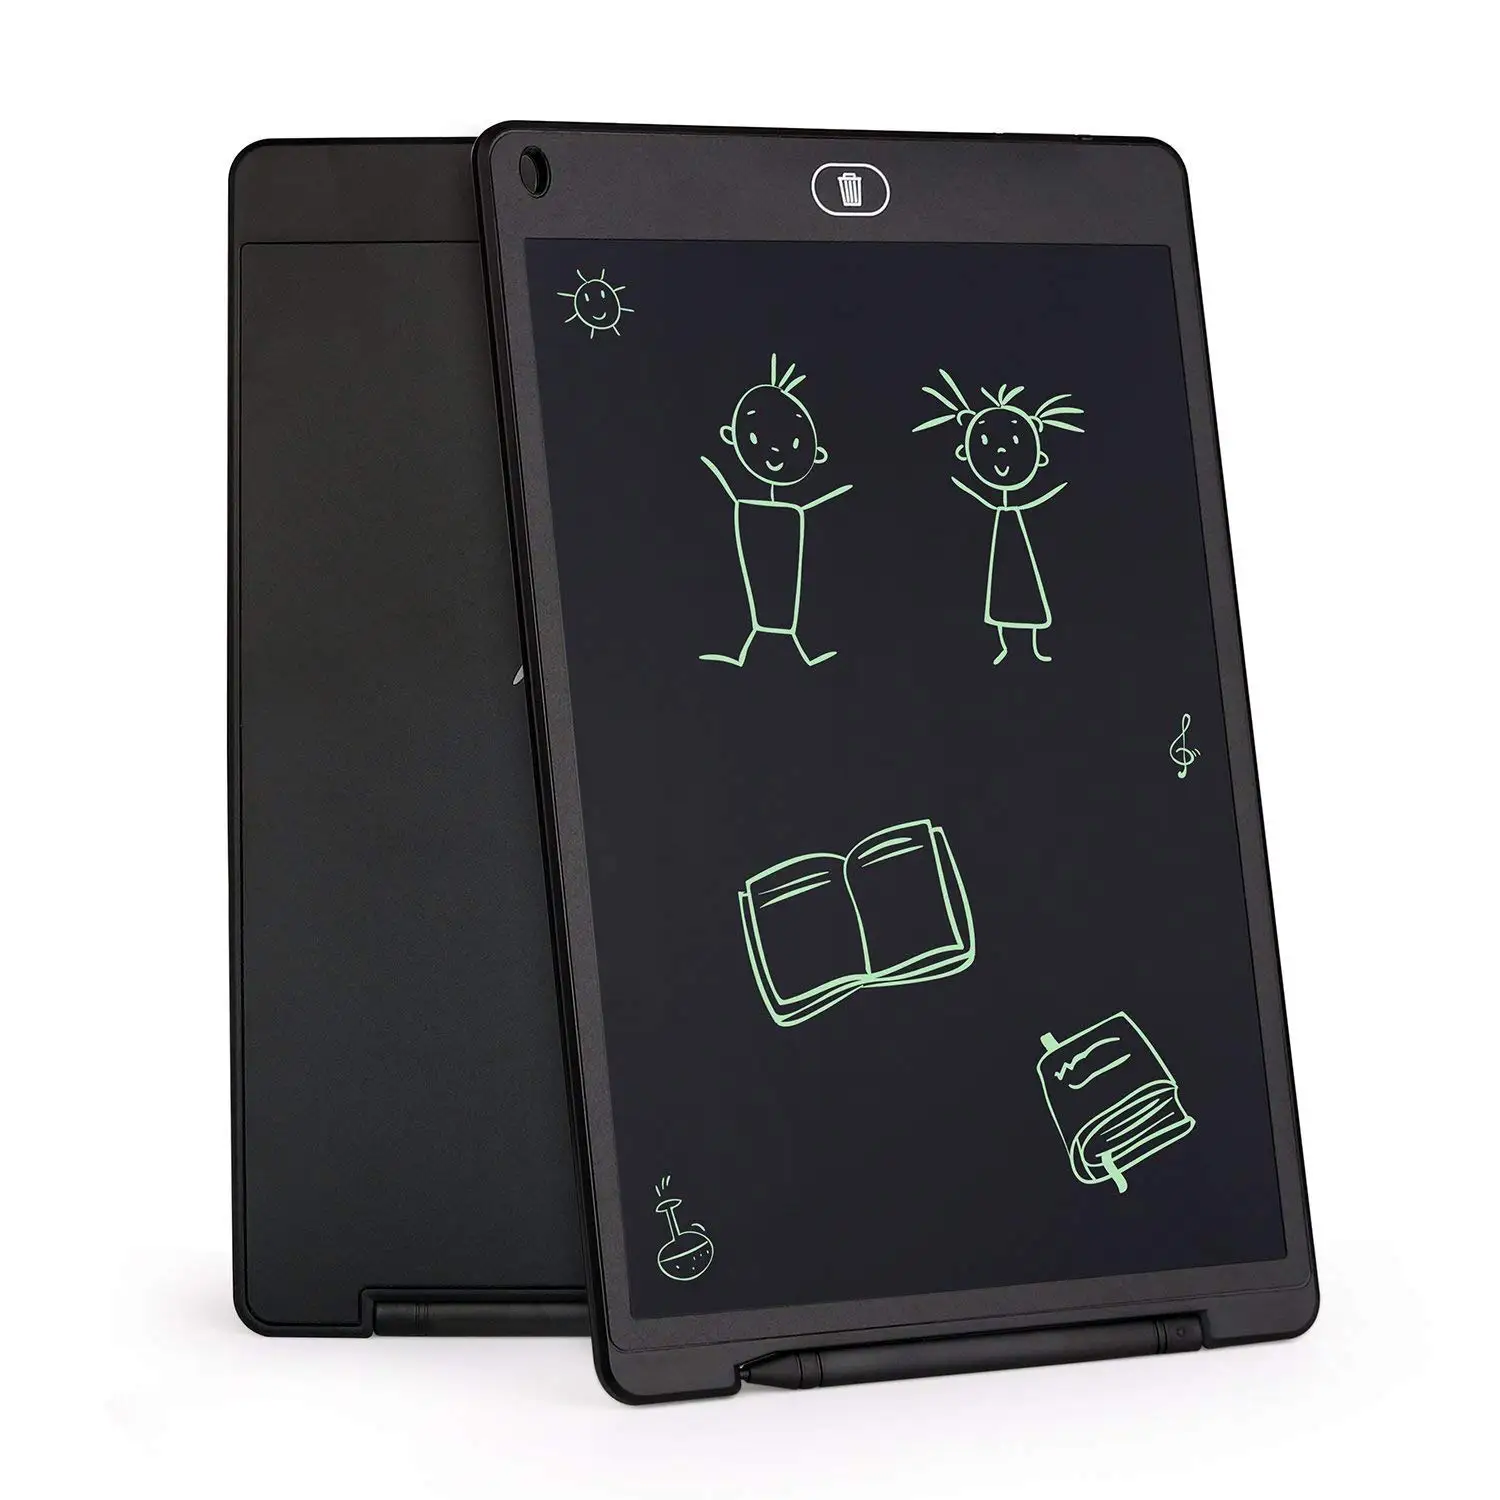 Cheap Writing Tablet For Kids, find Writing Tablet For Kids deals on